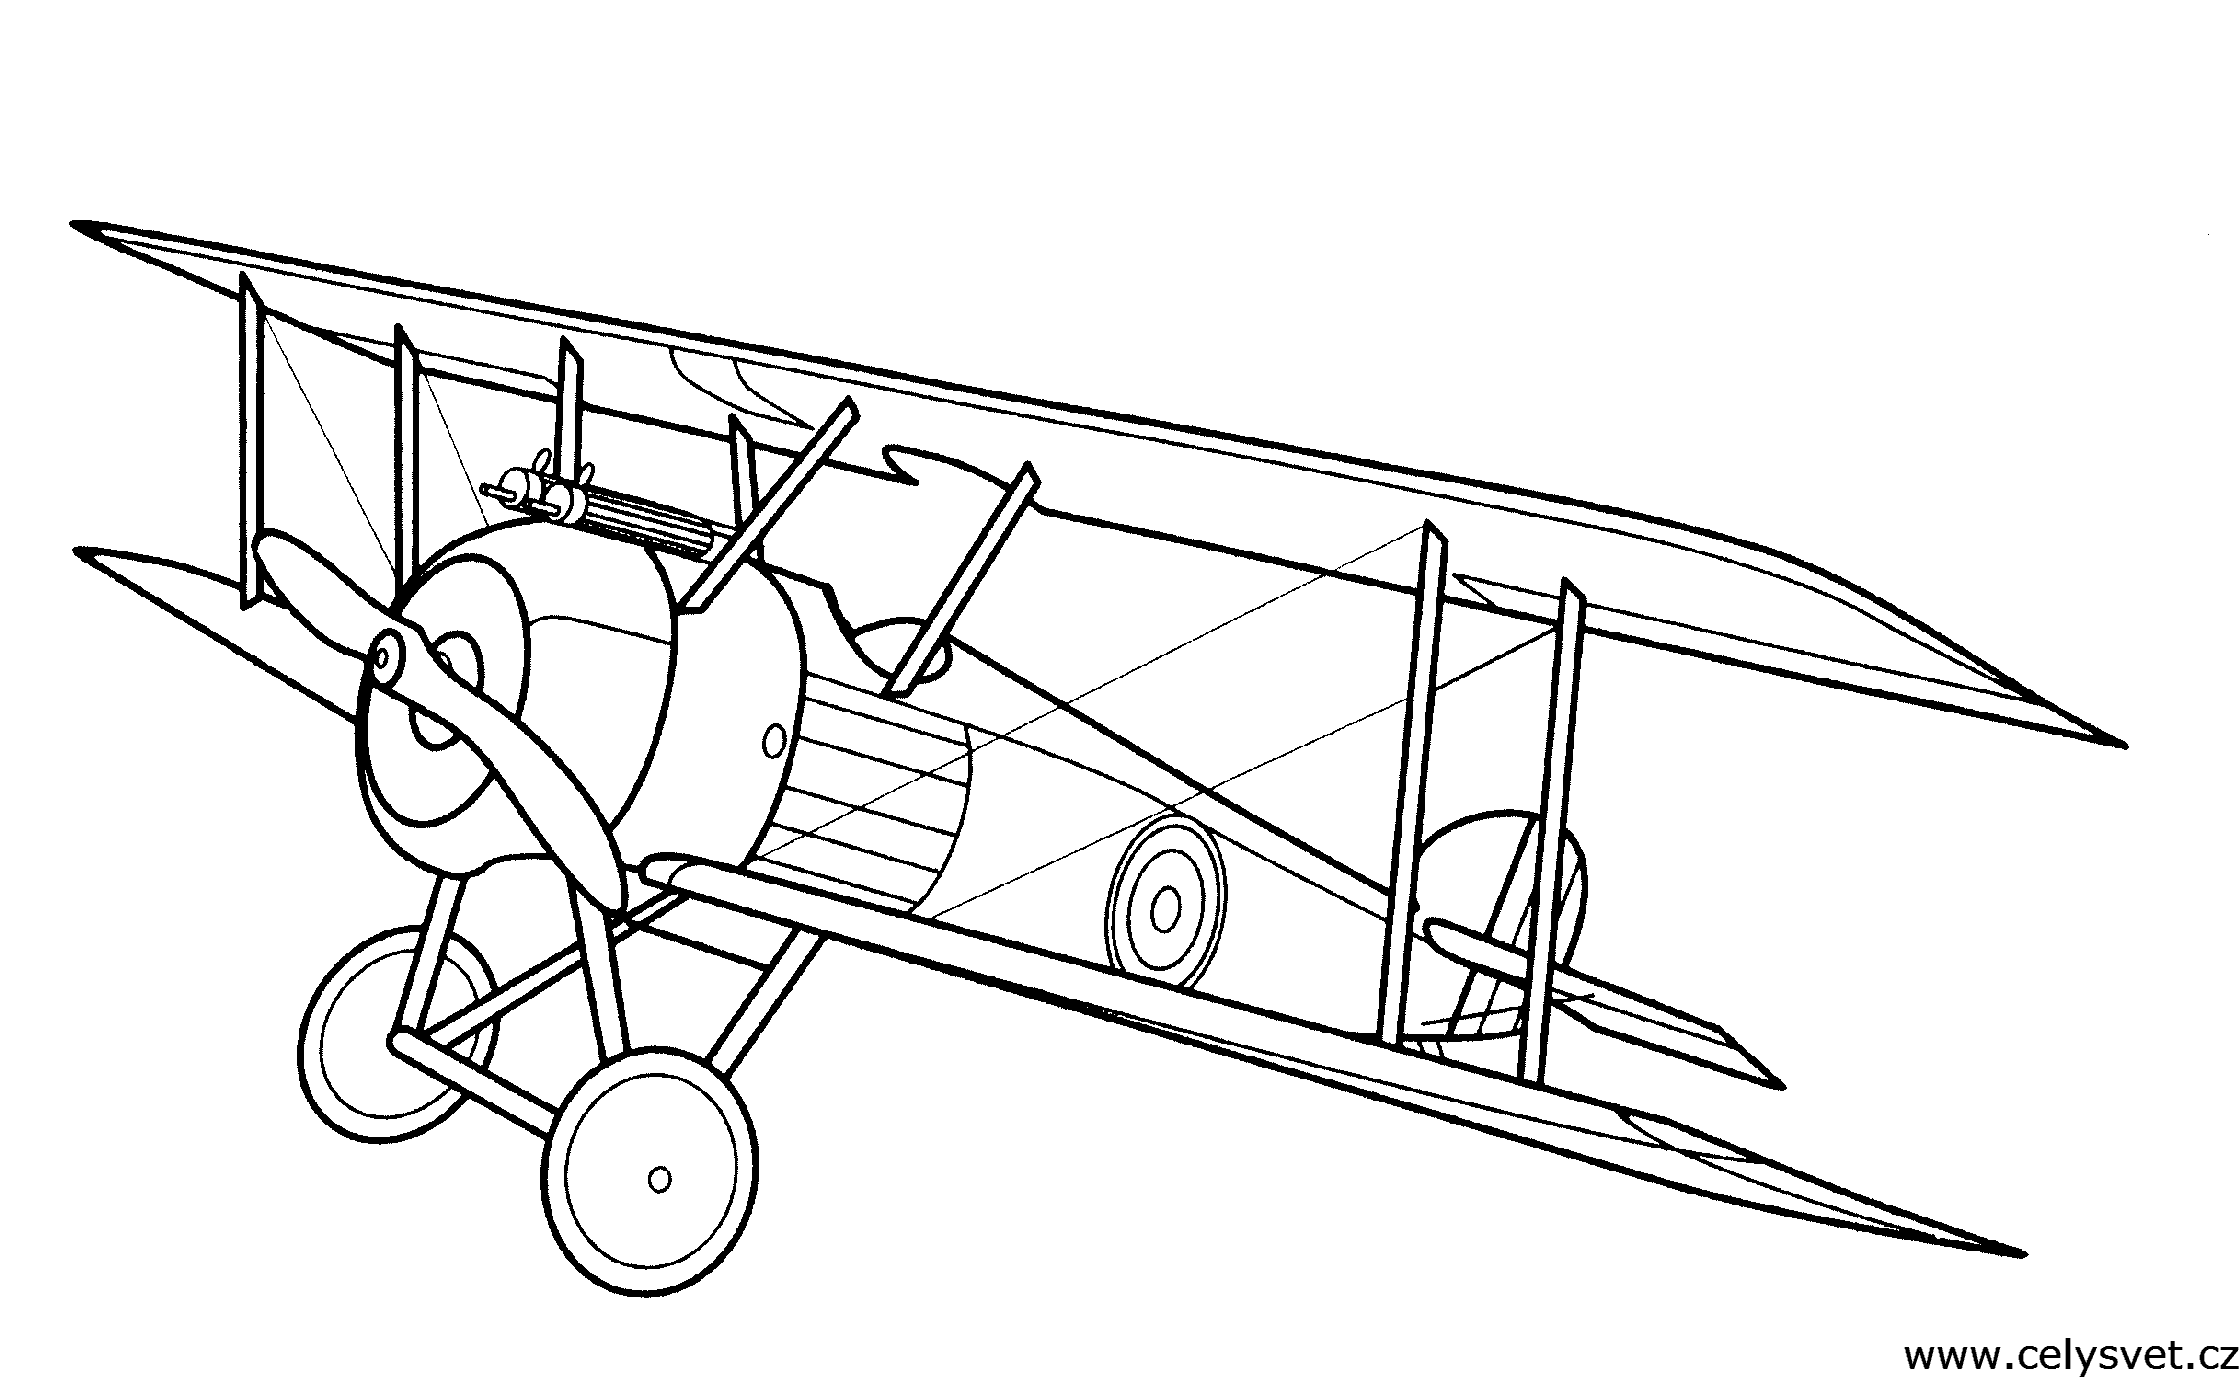 simple line drawing of an airplane